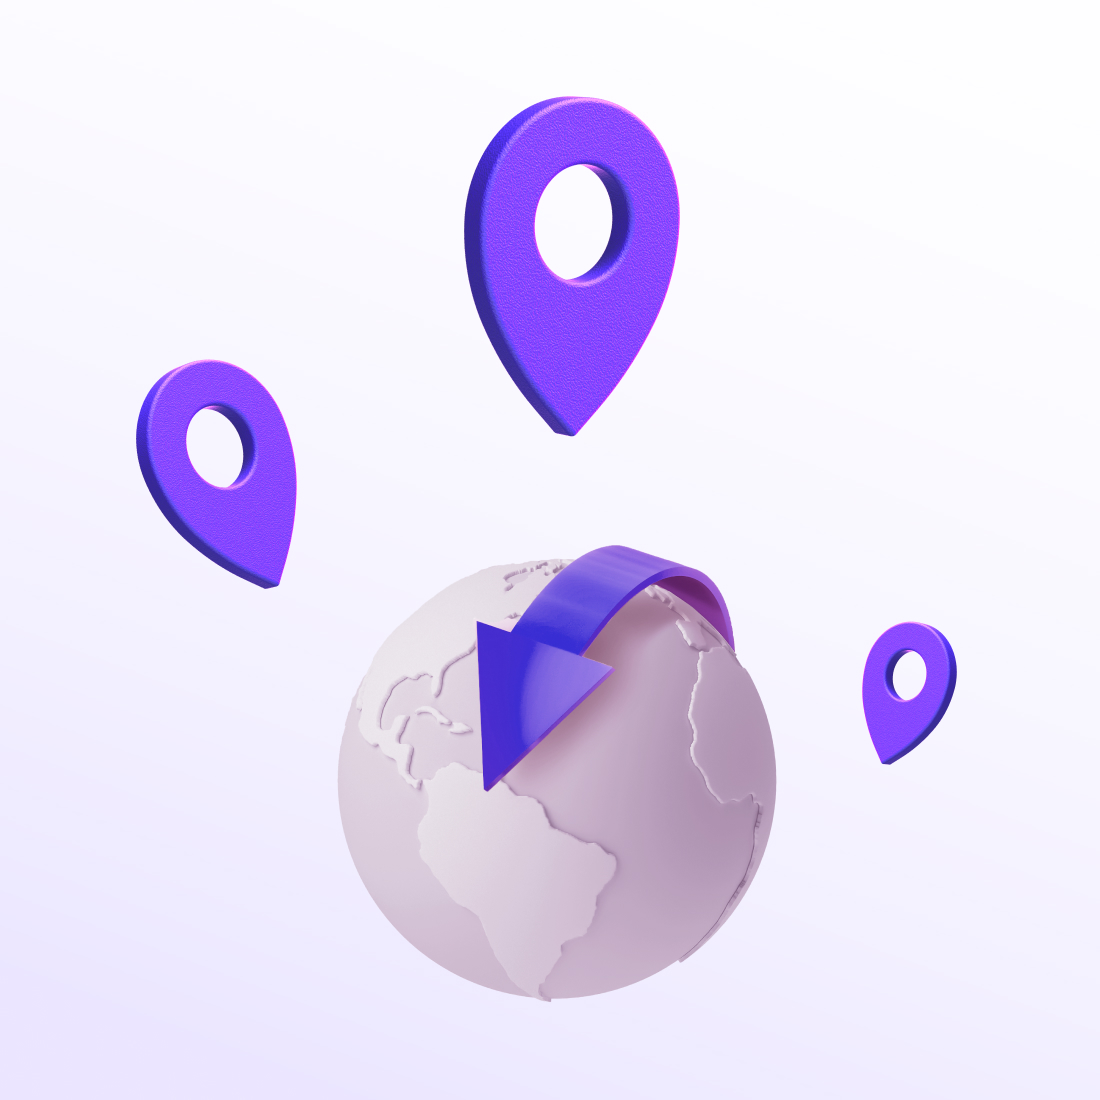 globe icon with location icons around it